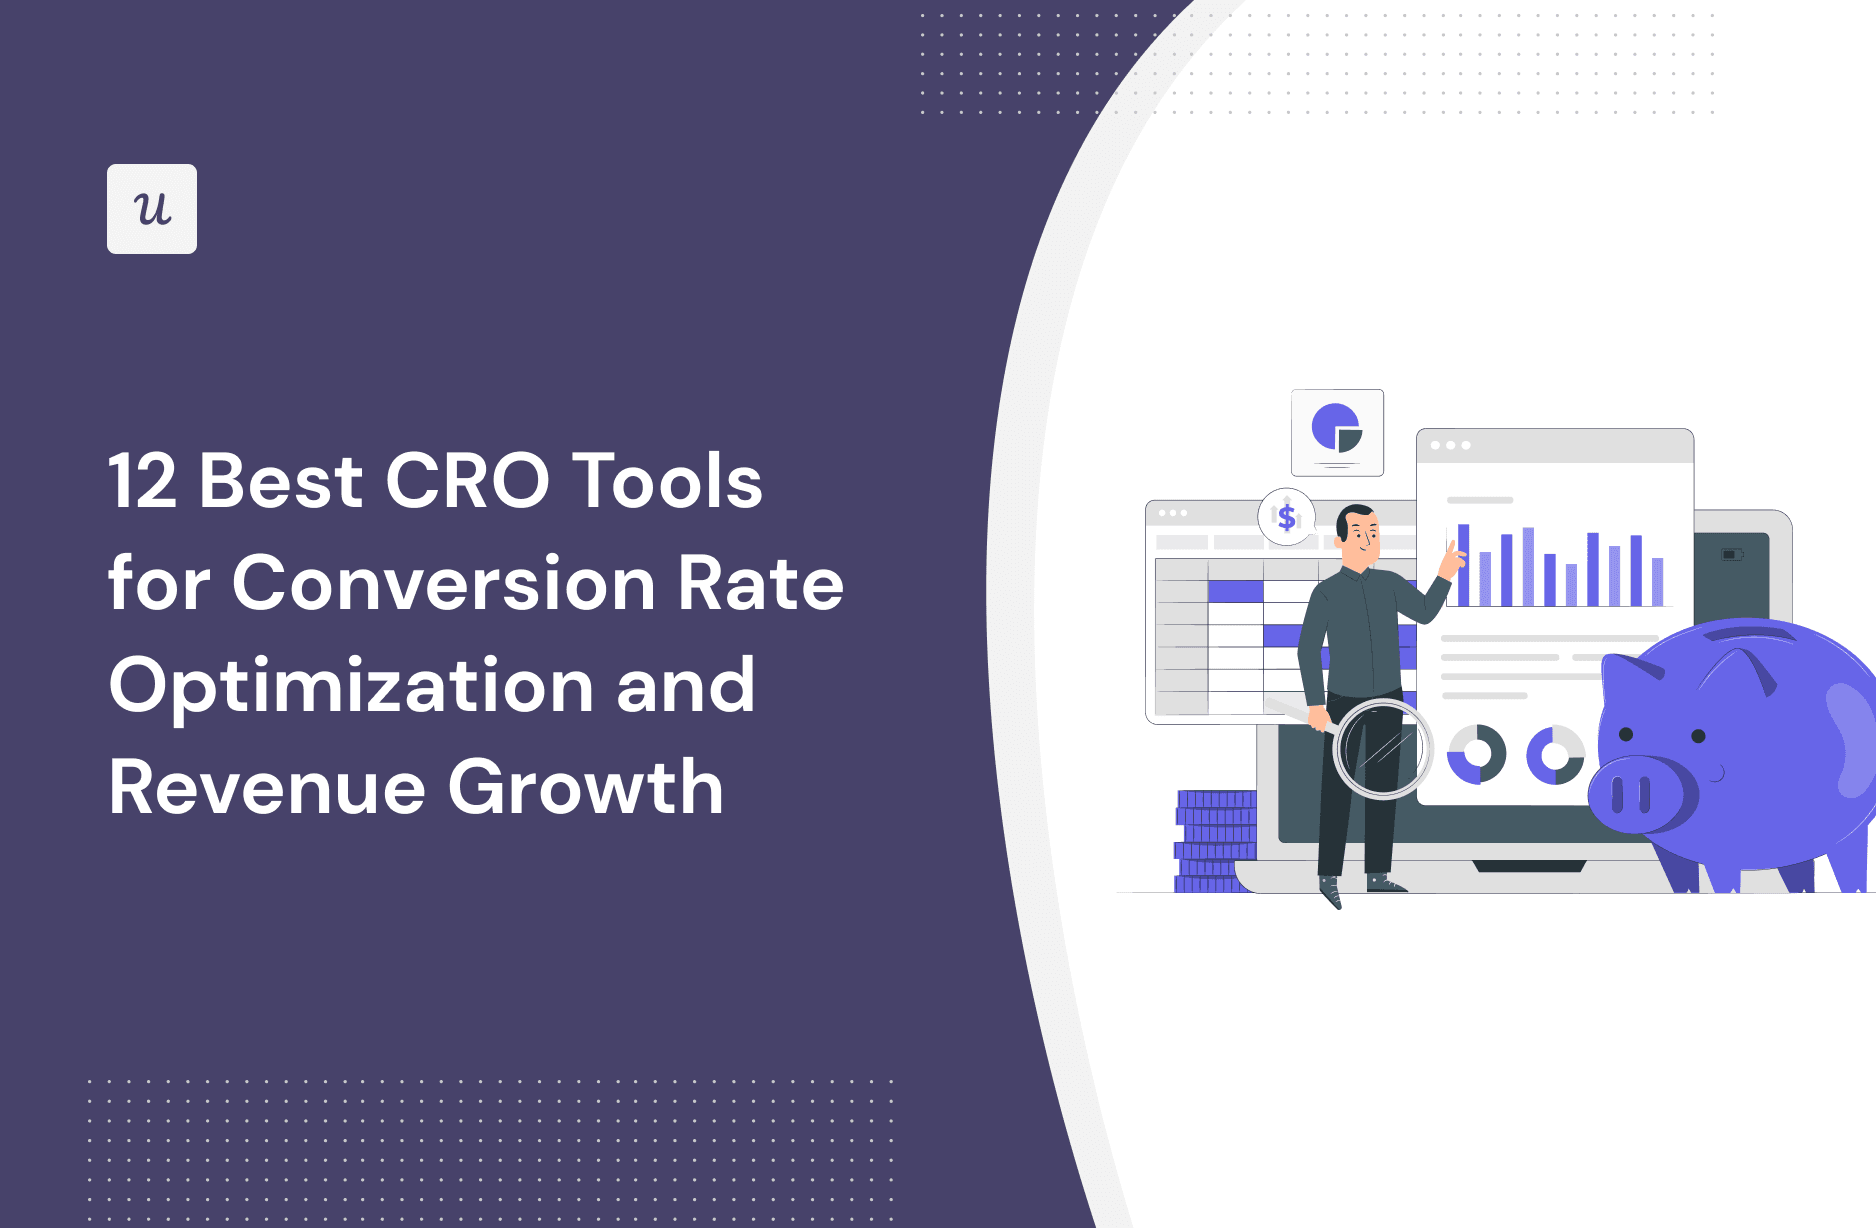 12 Best CRO Tools for Conversion Rate Optimization and Revenue Growth cover